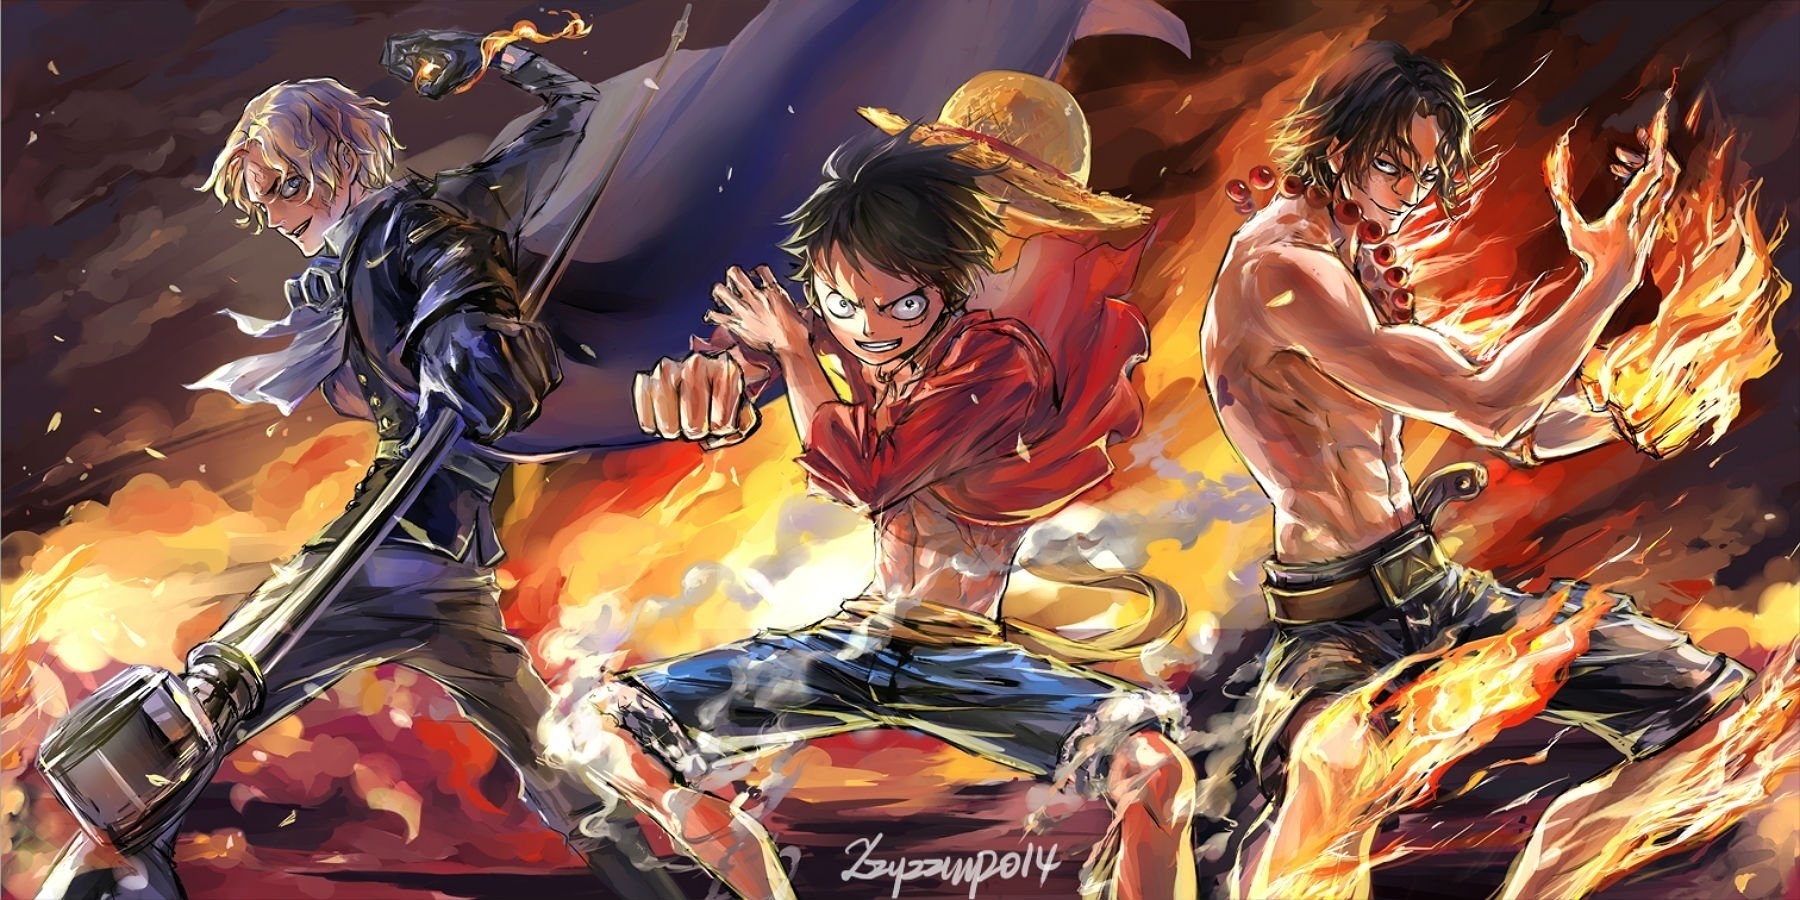 10 Best One Piece 1920X1080 Wallpaper FULL HD 1080p For PC Background 2020